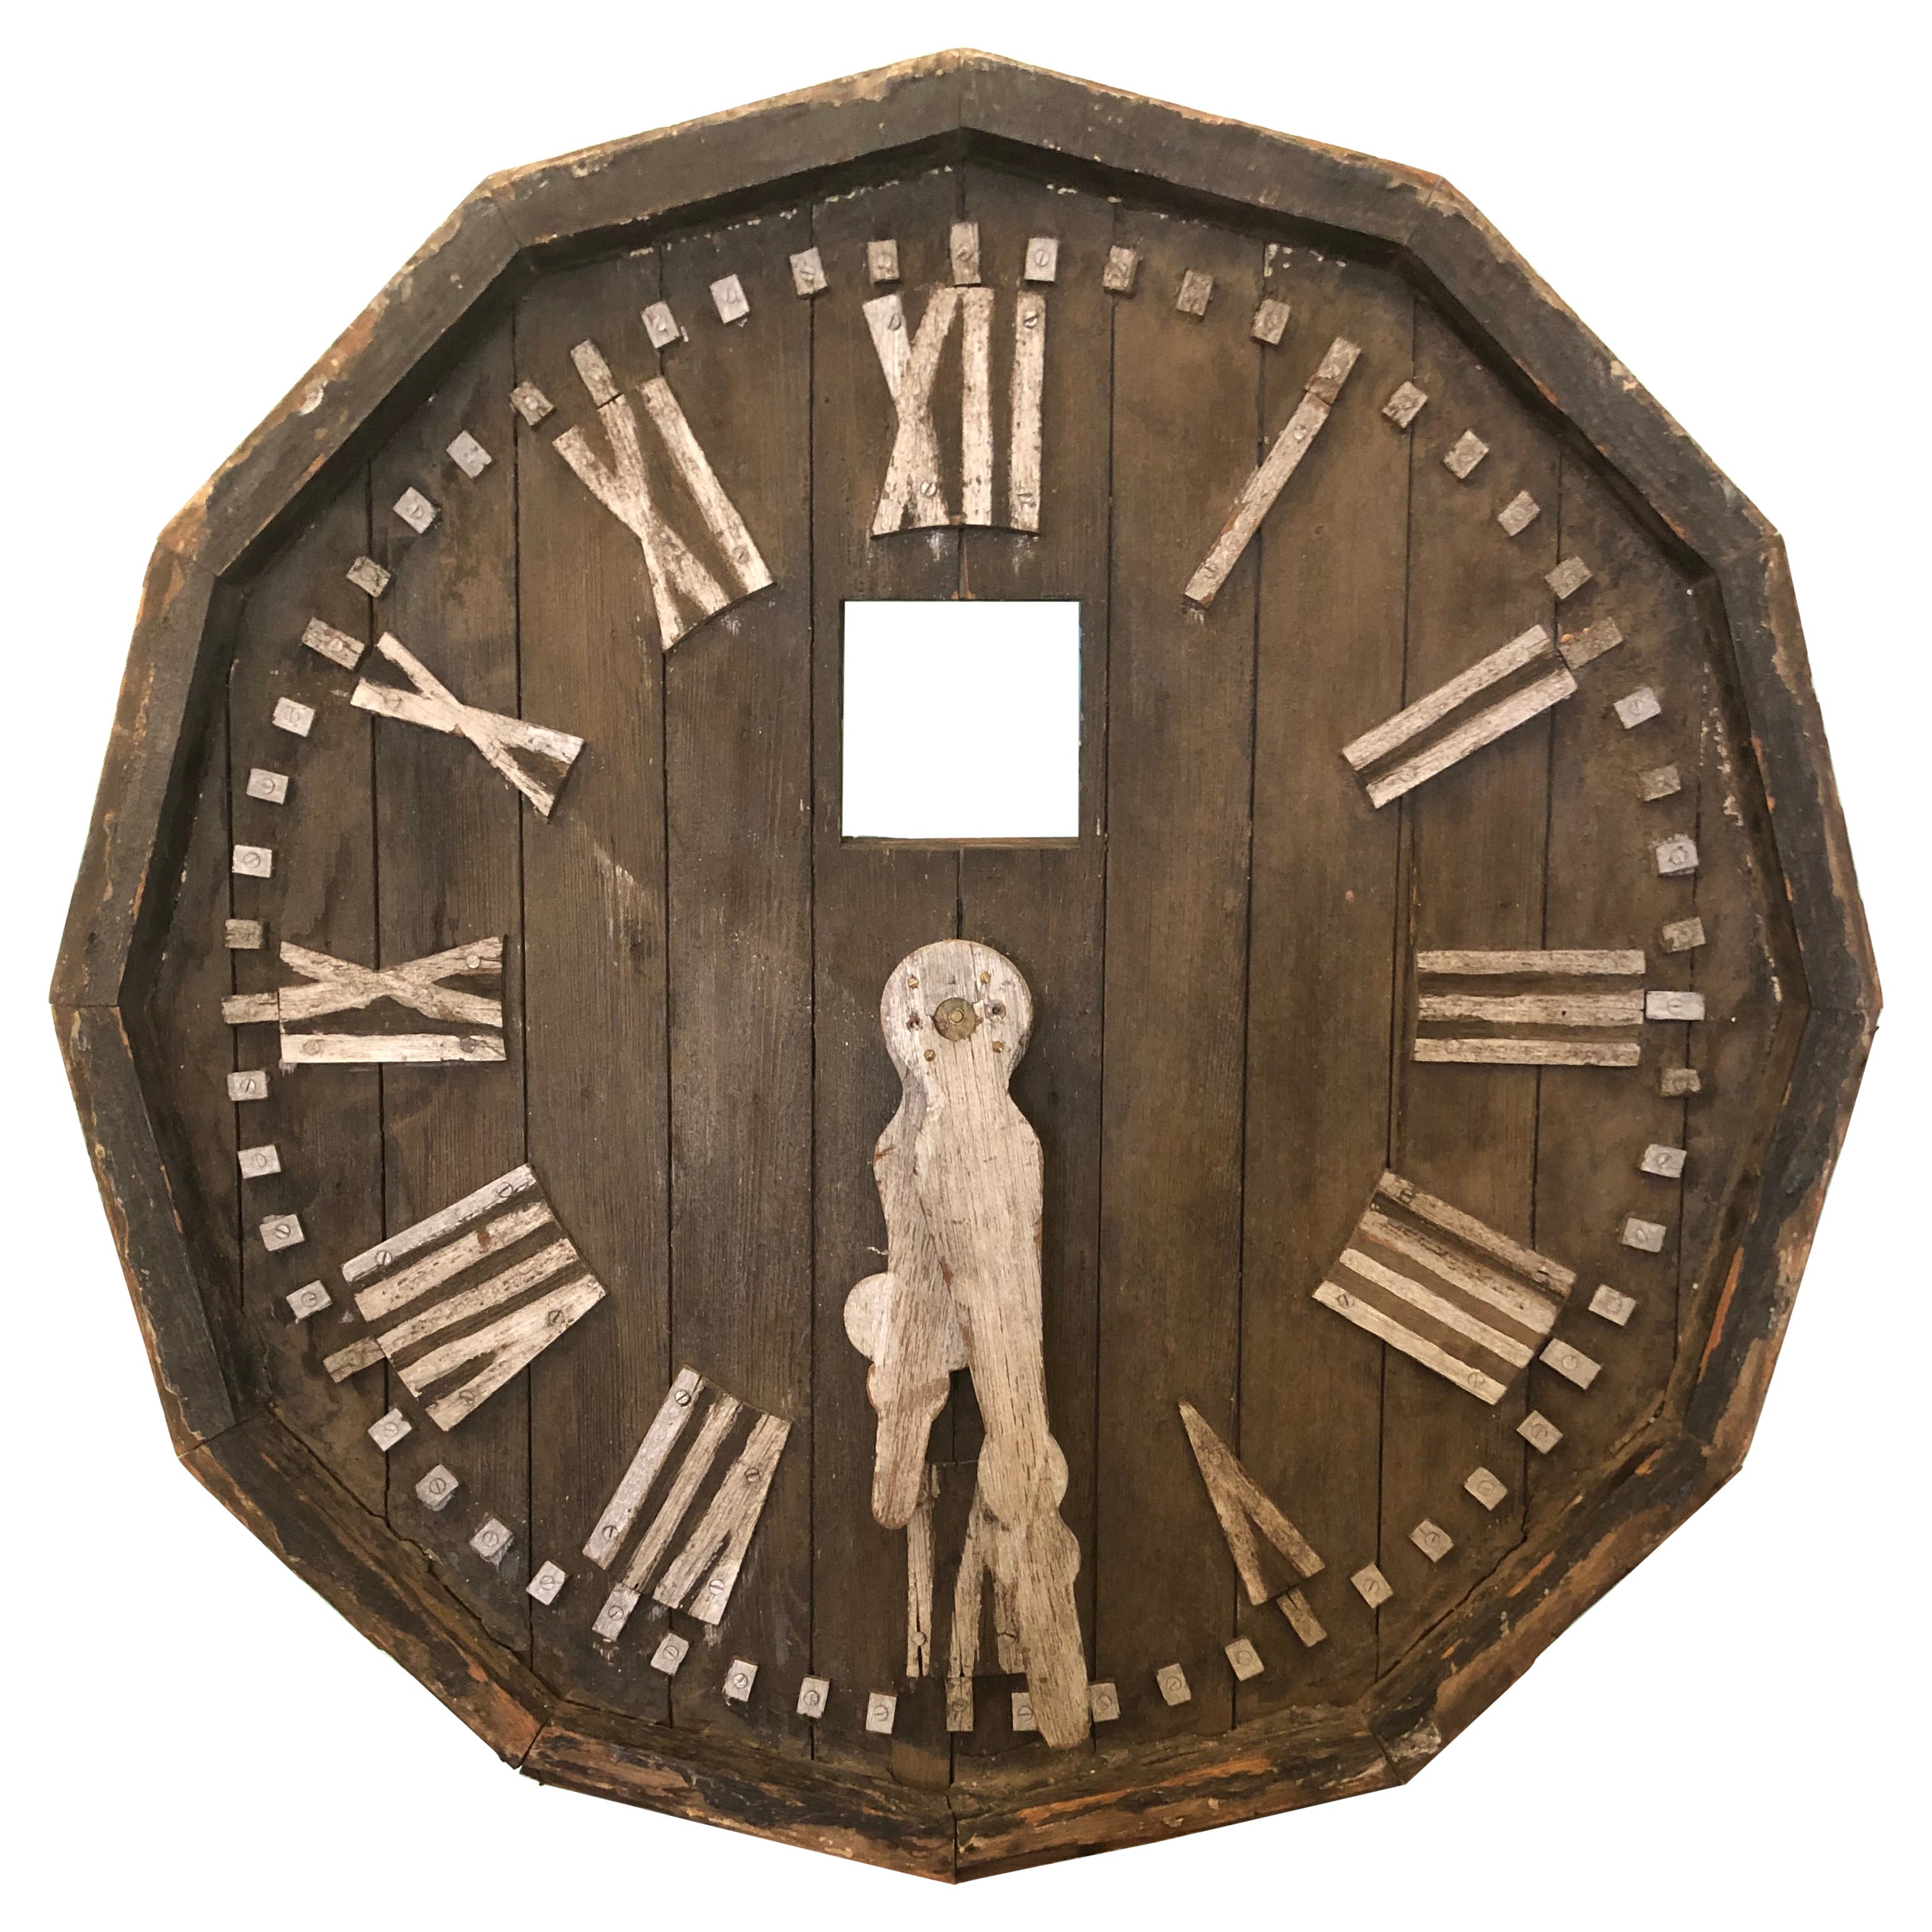 Huge Antique Distressed Reclaimed Wood Architectural Fragment Clock Face For Sale